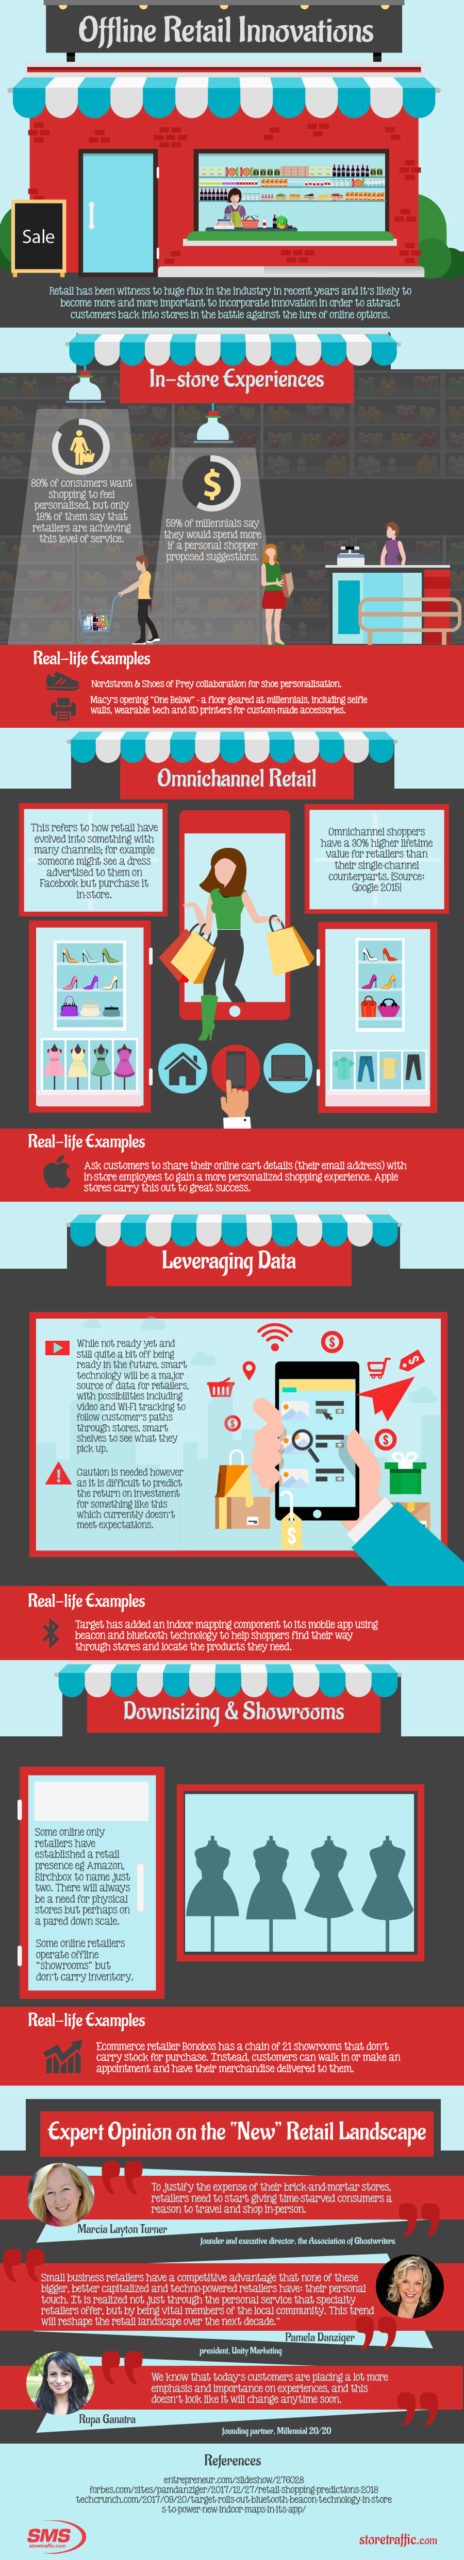 Offline Retail Store Innovations Infographic